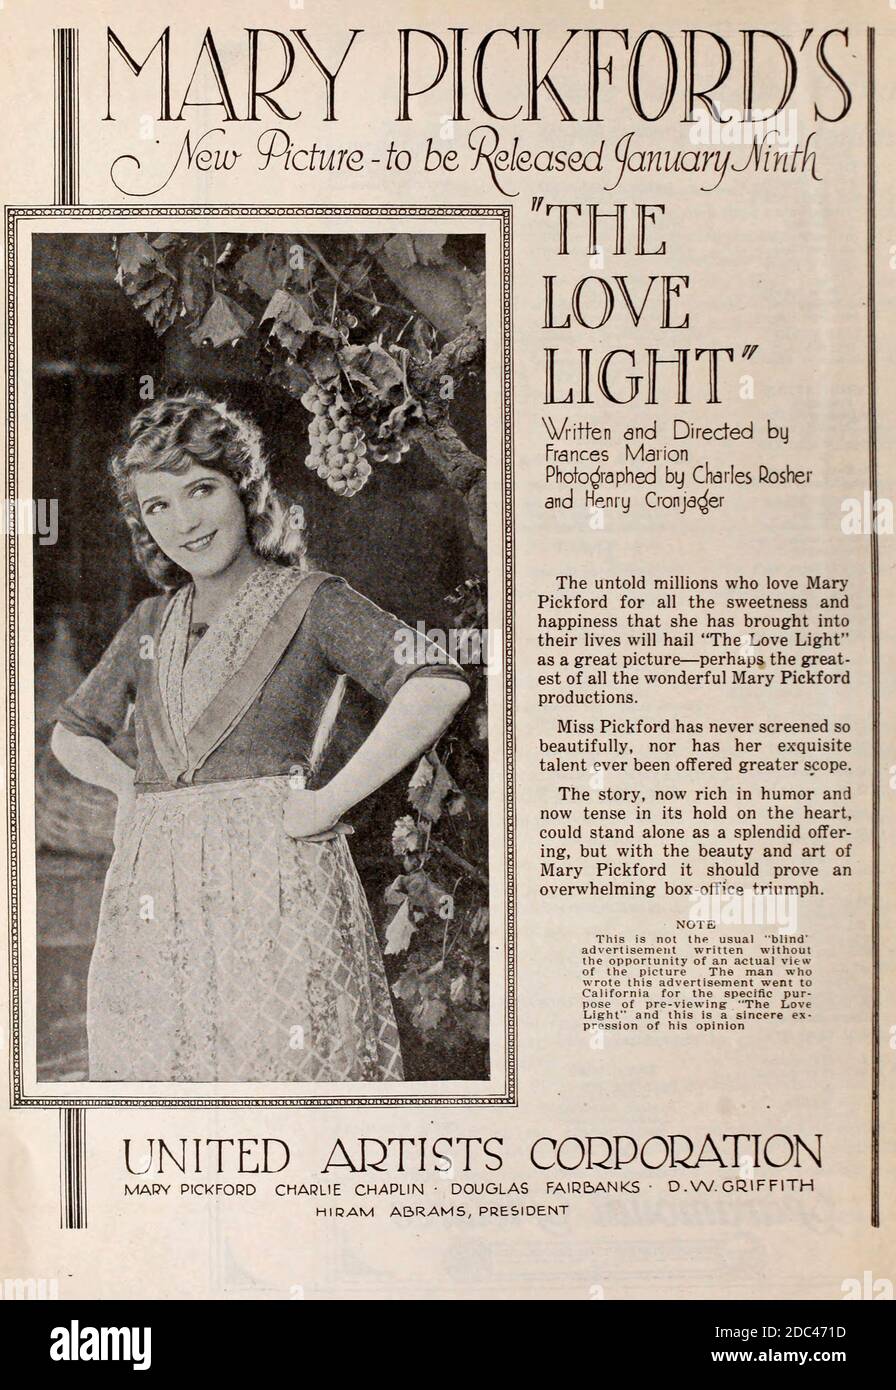 Werbung für Mary Pickfords The Love Light - Motion Picture, 1920 Stockfoto